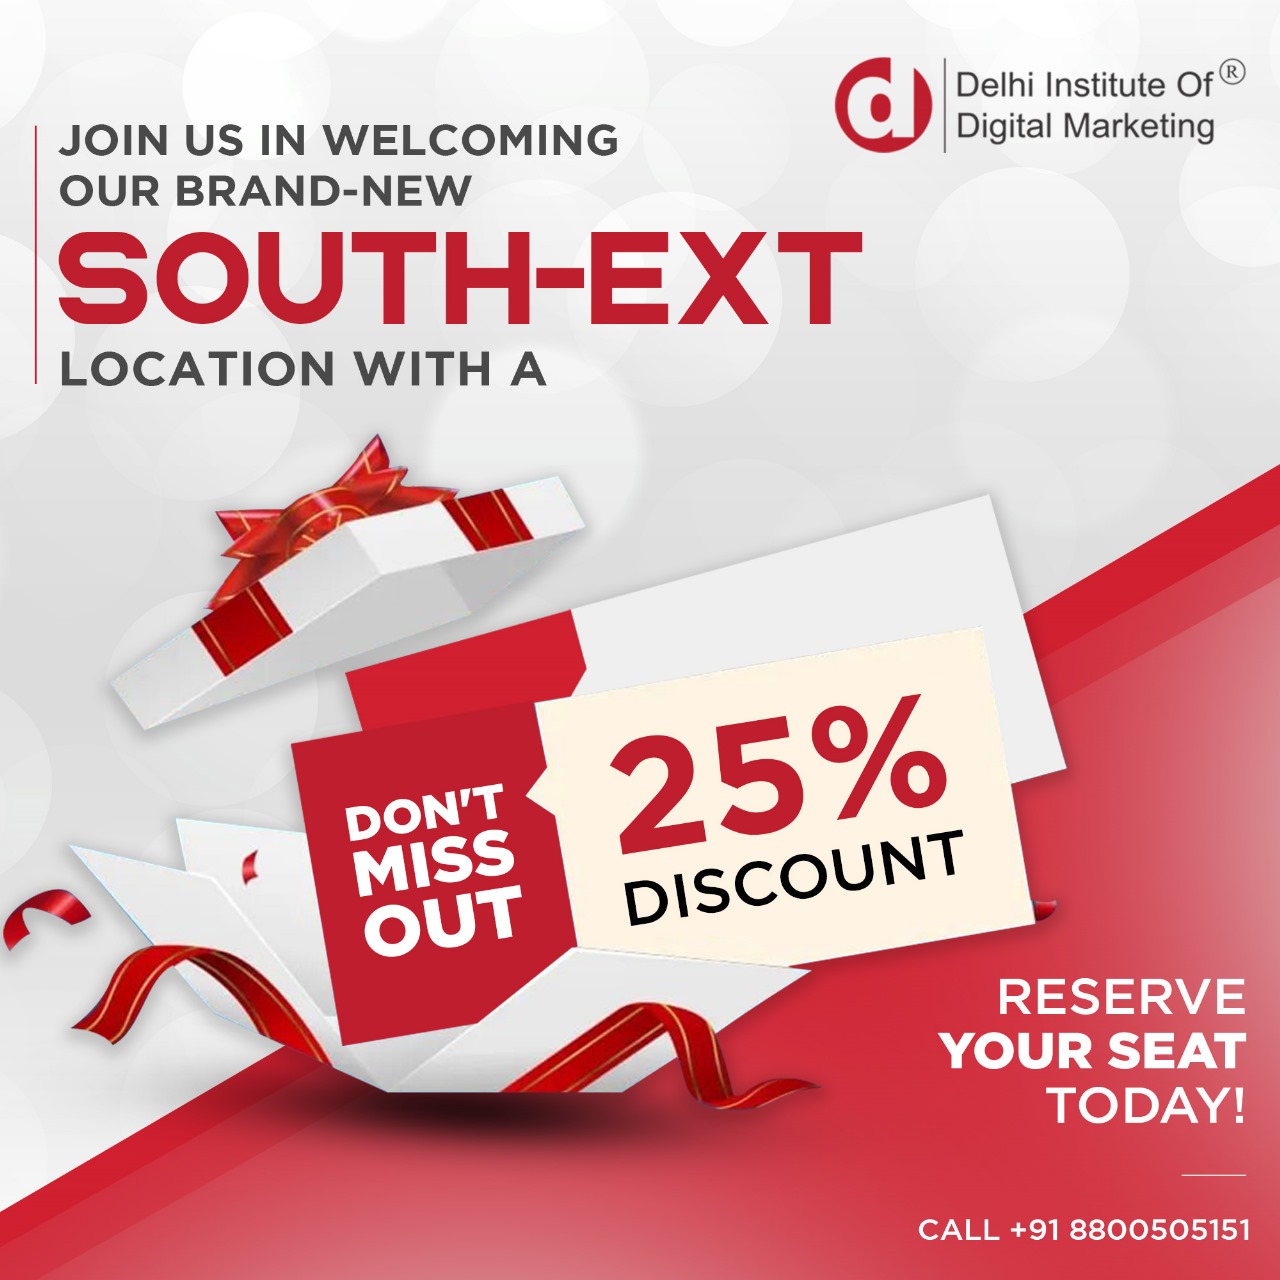 DIDM New Branch in South Extension Avail the Inaugural 25 Percent Discount